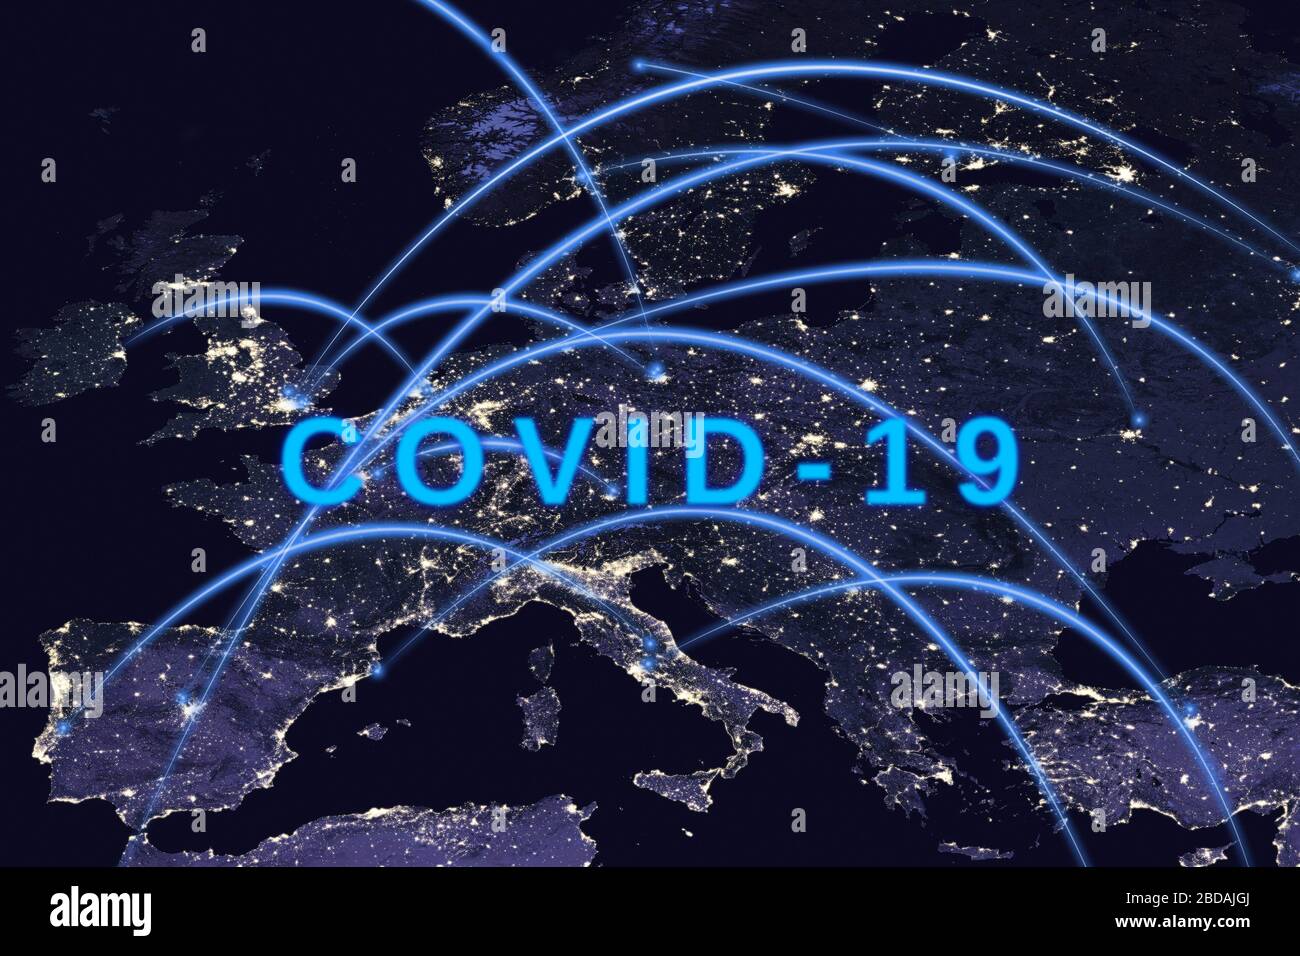 Concept of spreading of Covid-19 disease around Europe seen from satellite images at night- contains elements furnished by NASA Stock Photo